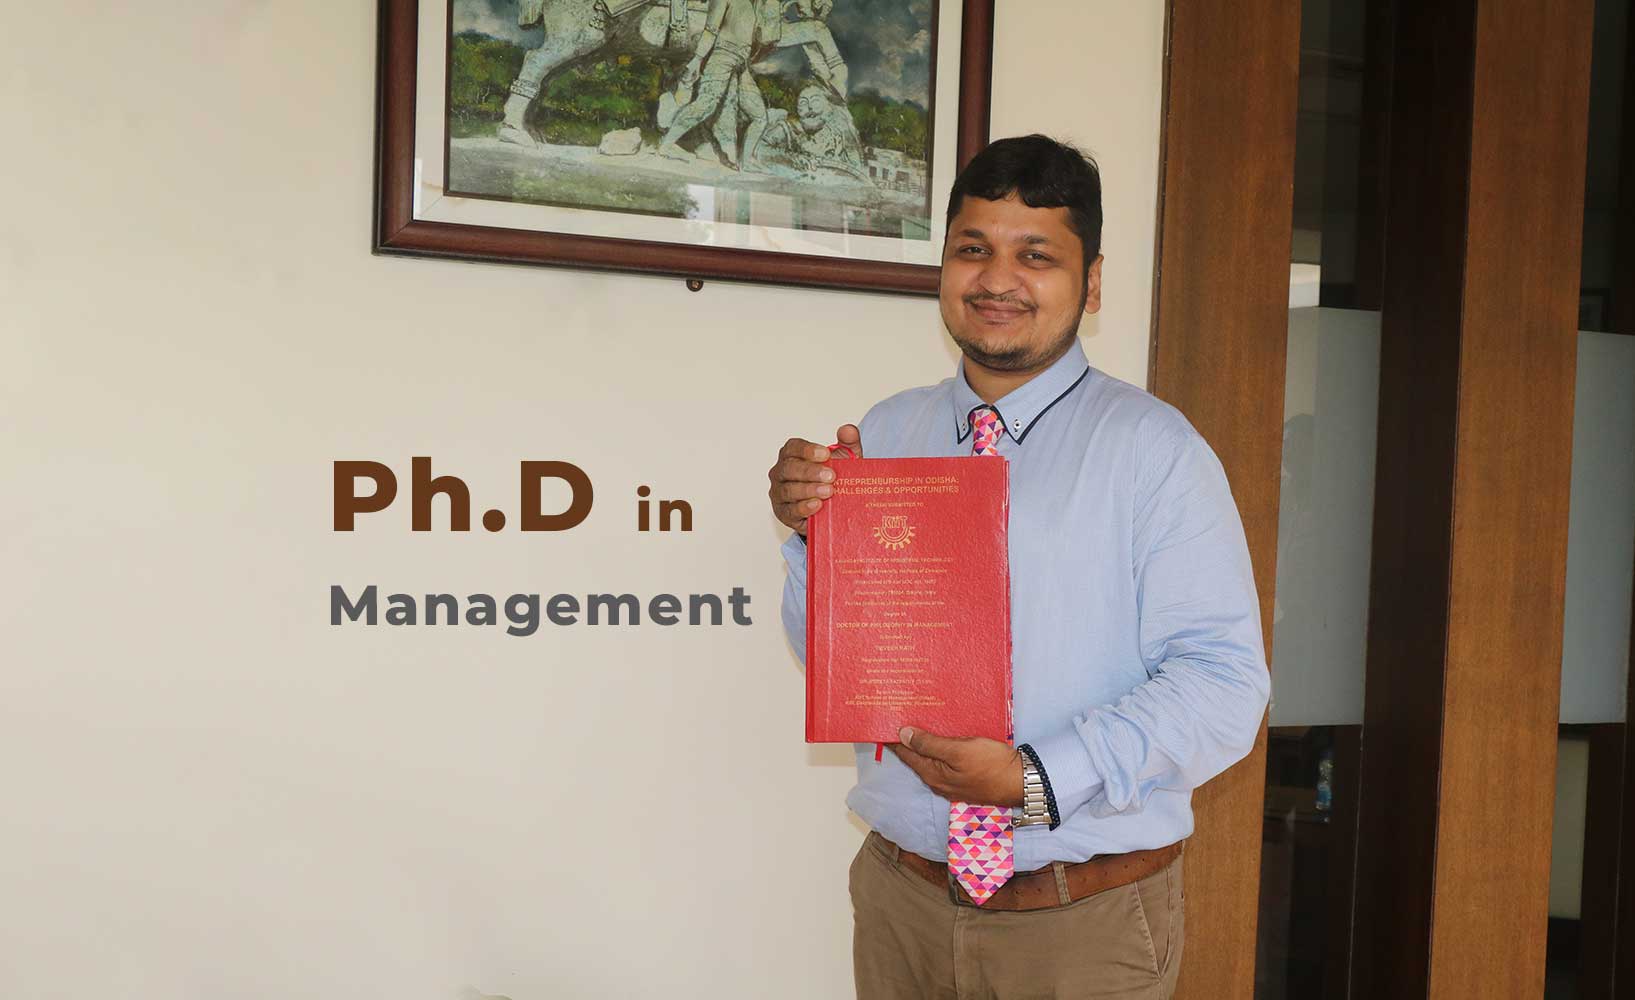 phd in management from government university